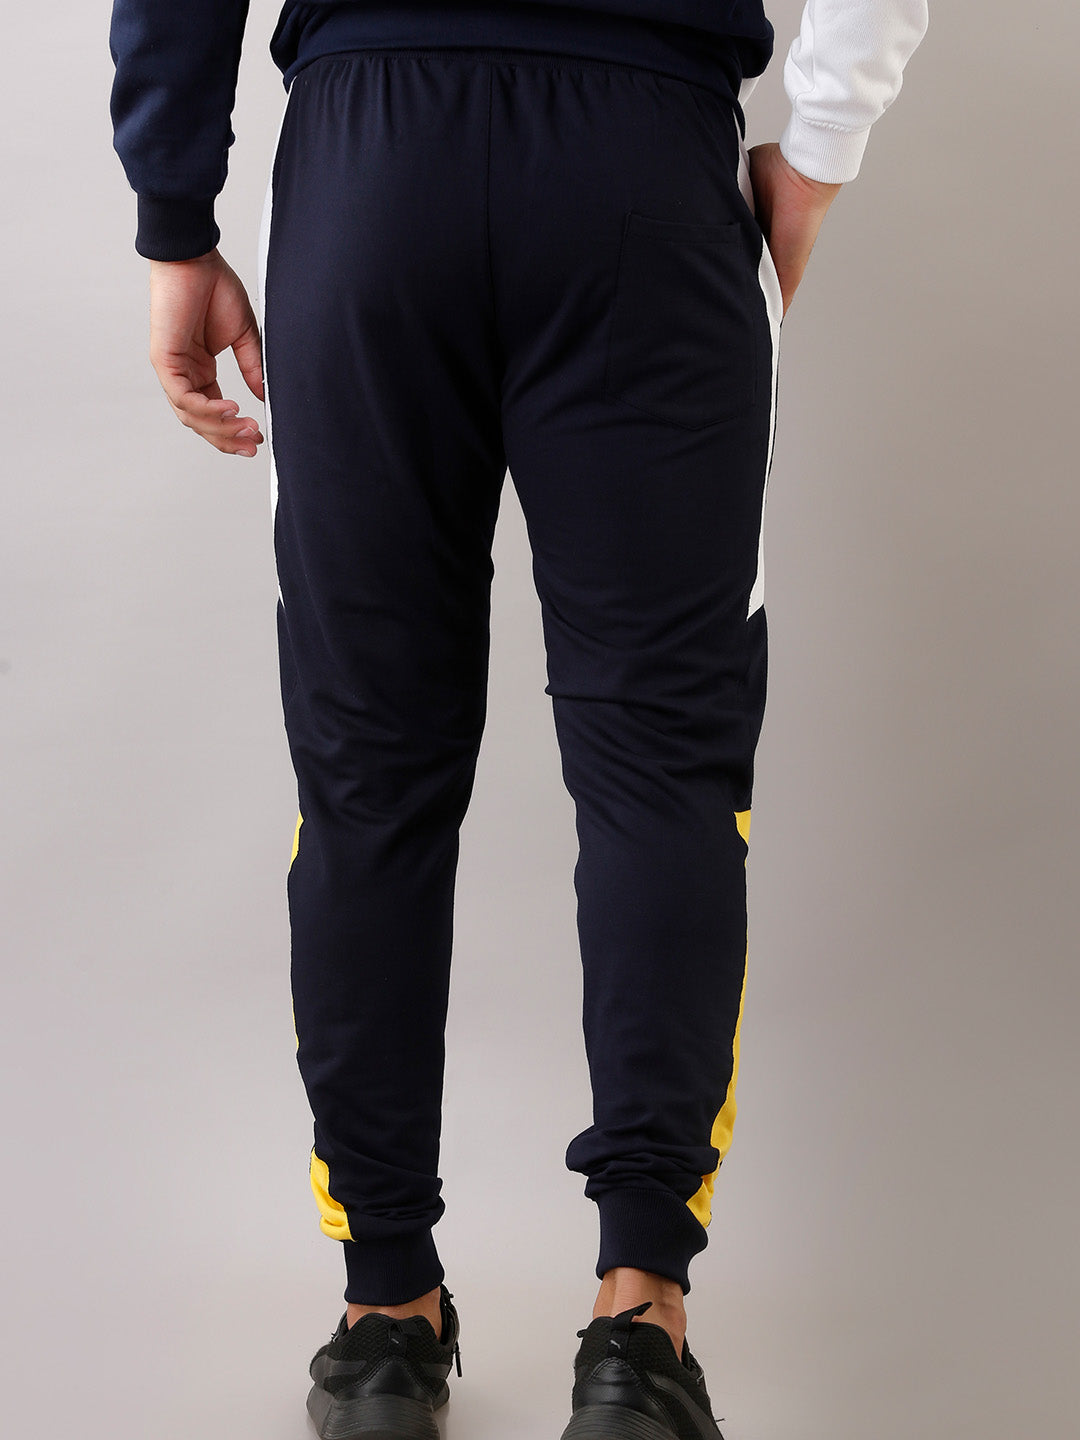 COLOR BLOCK BLUE YELLOW TRACK PANTS